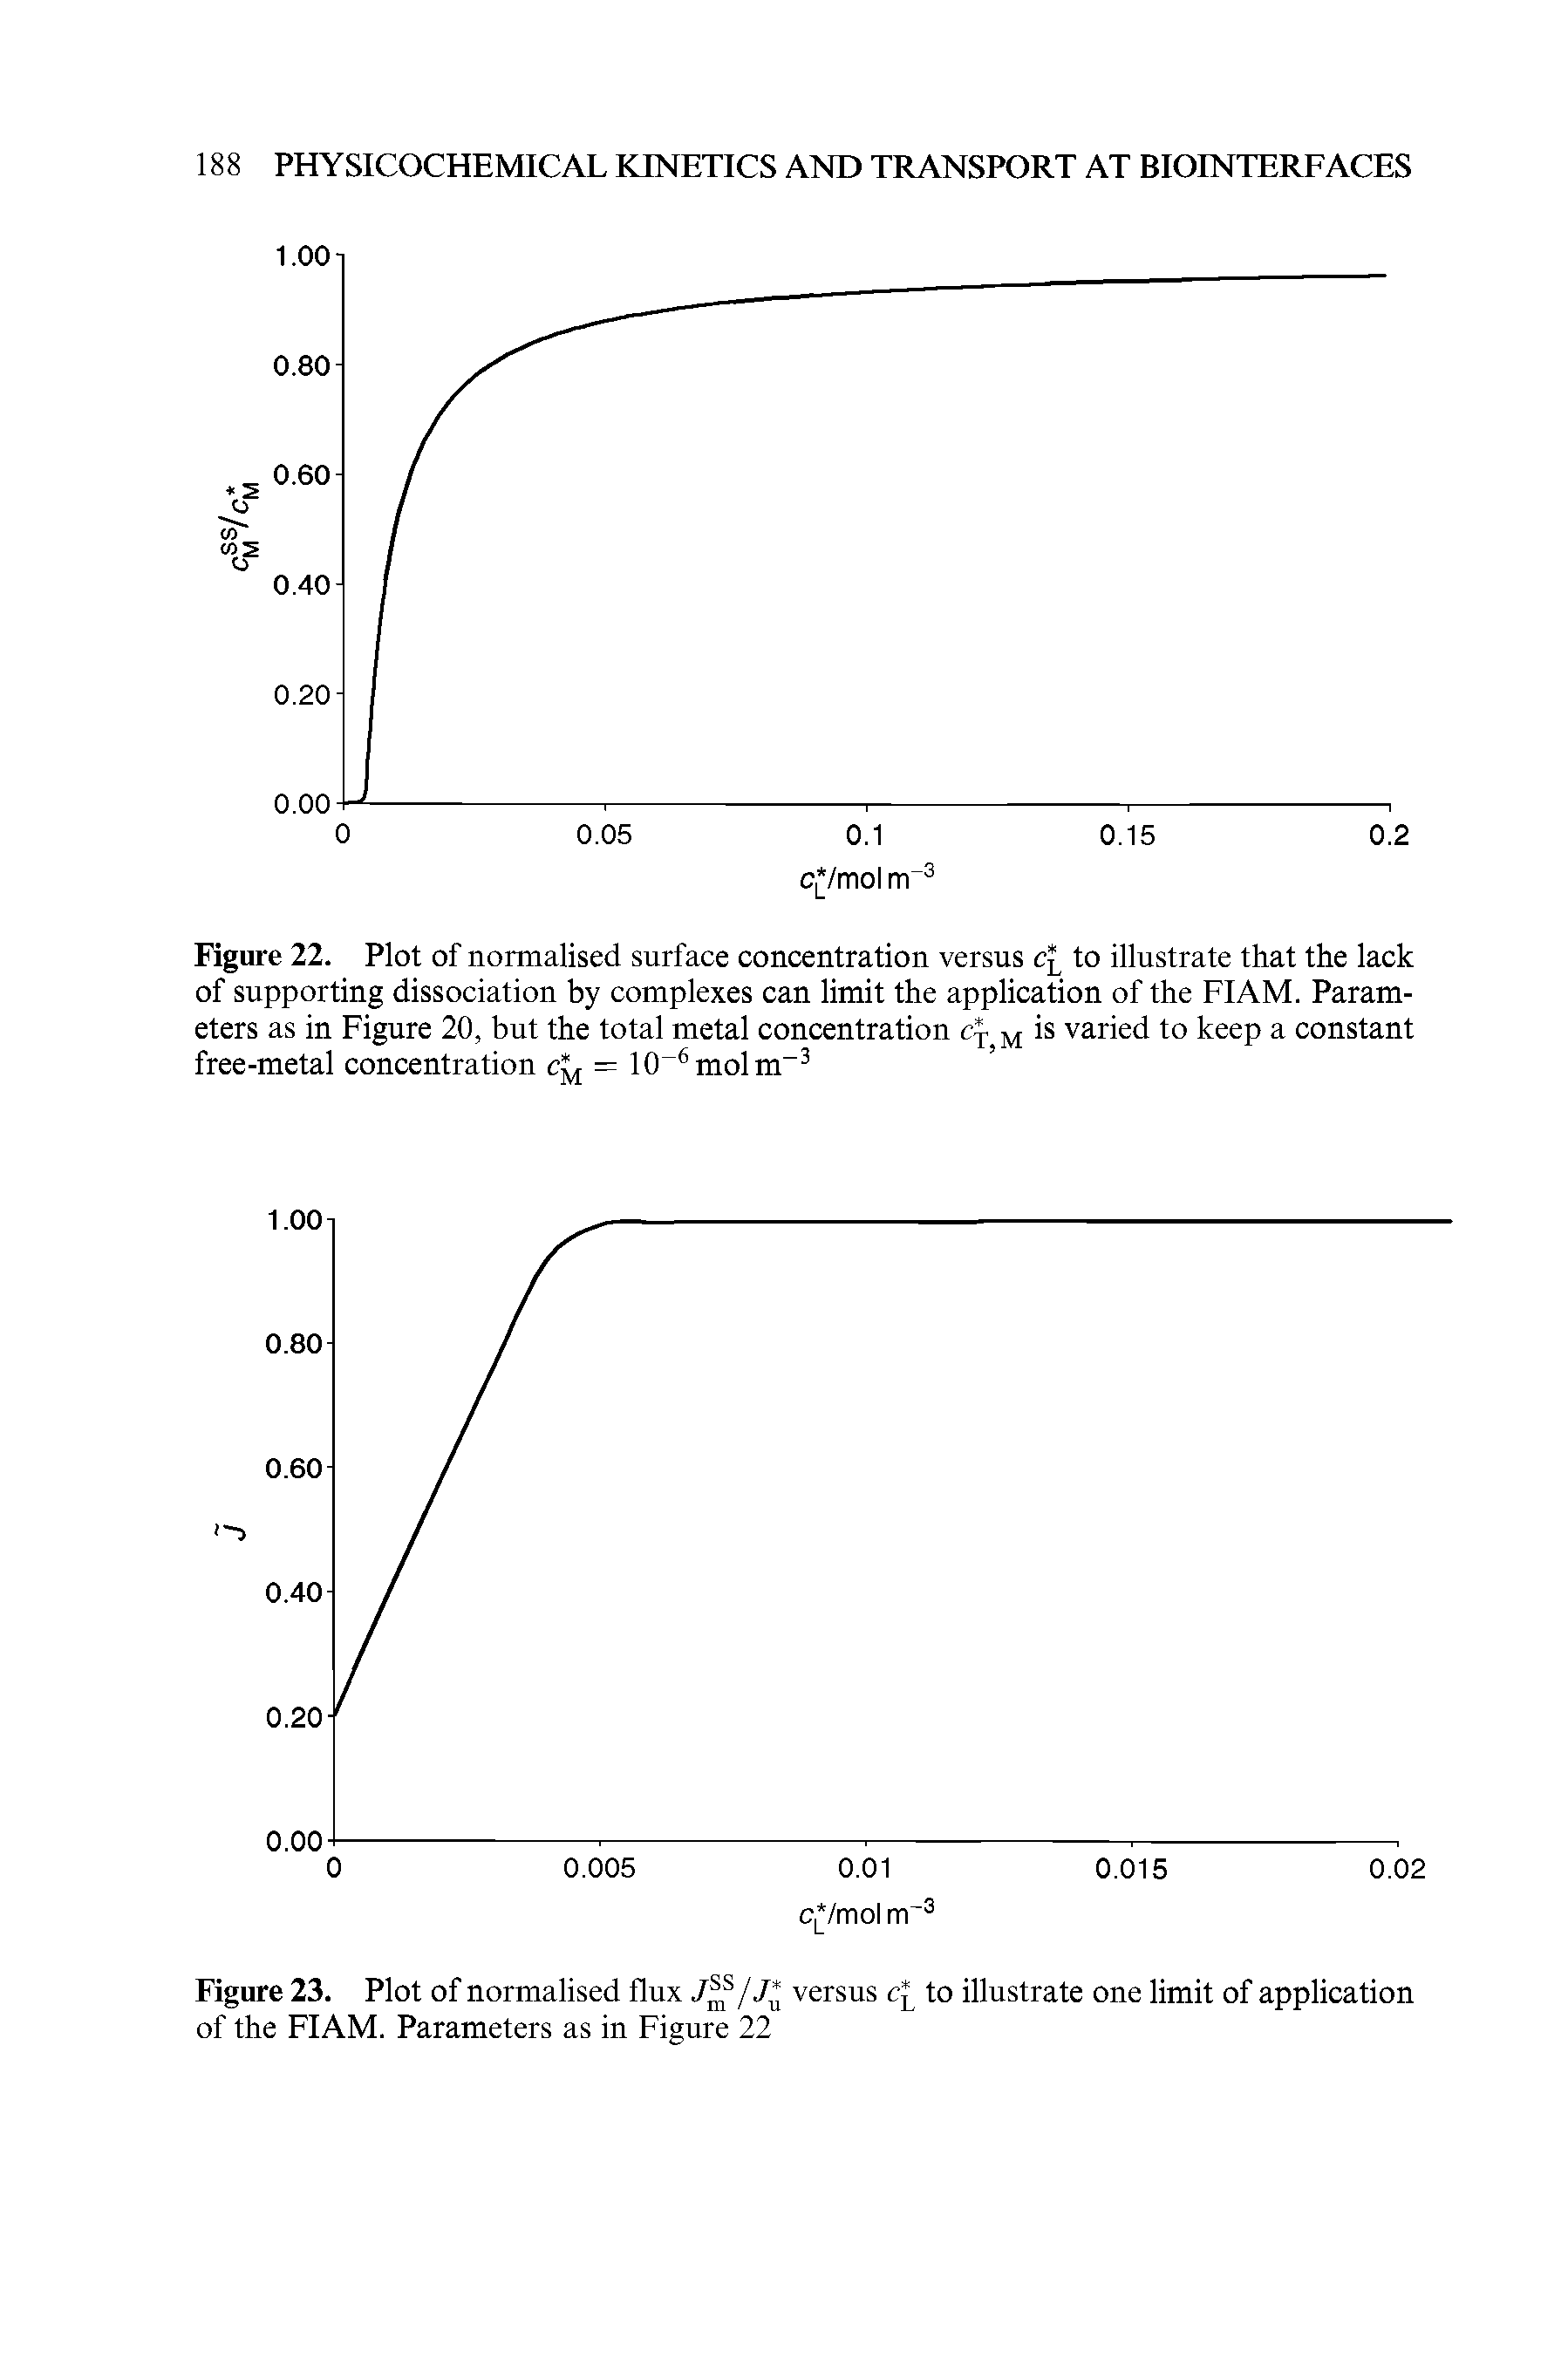 Figure 22. Plot of normalised surface concentration versus c to illustrate that the lack of supporting dissociation by complexes can limit the application of the FIAM. Parameters as in Figure 20, but the total metal concentration M is varied to keep a constant free-metal concentration = 10 6molm-3...